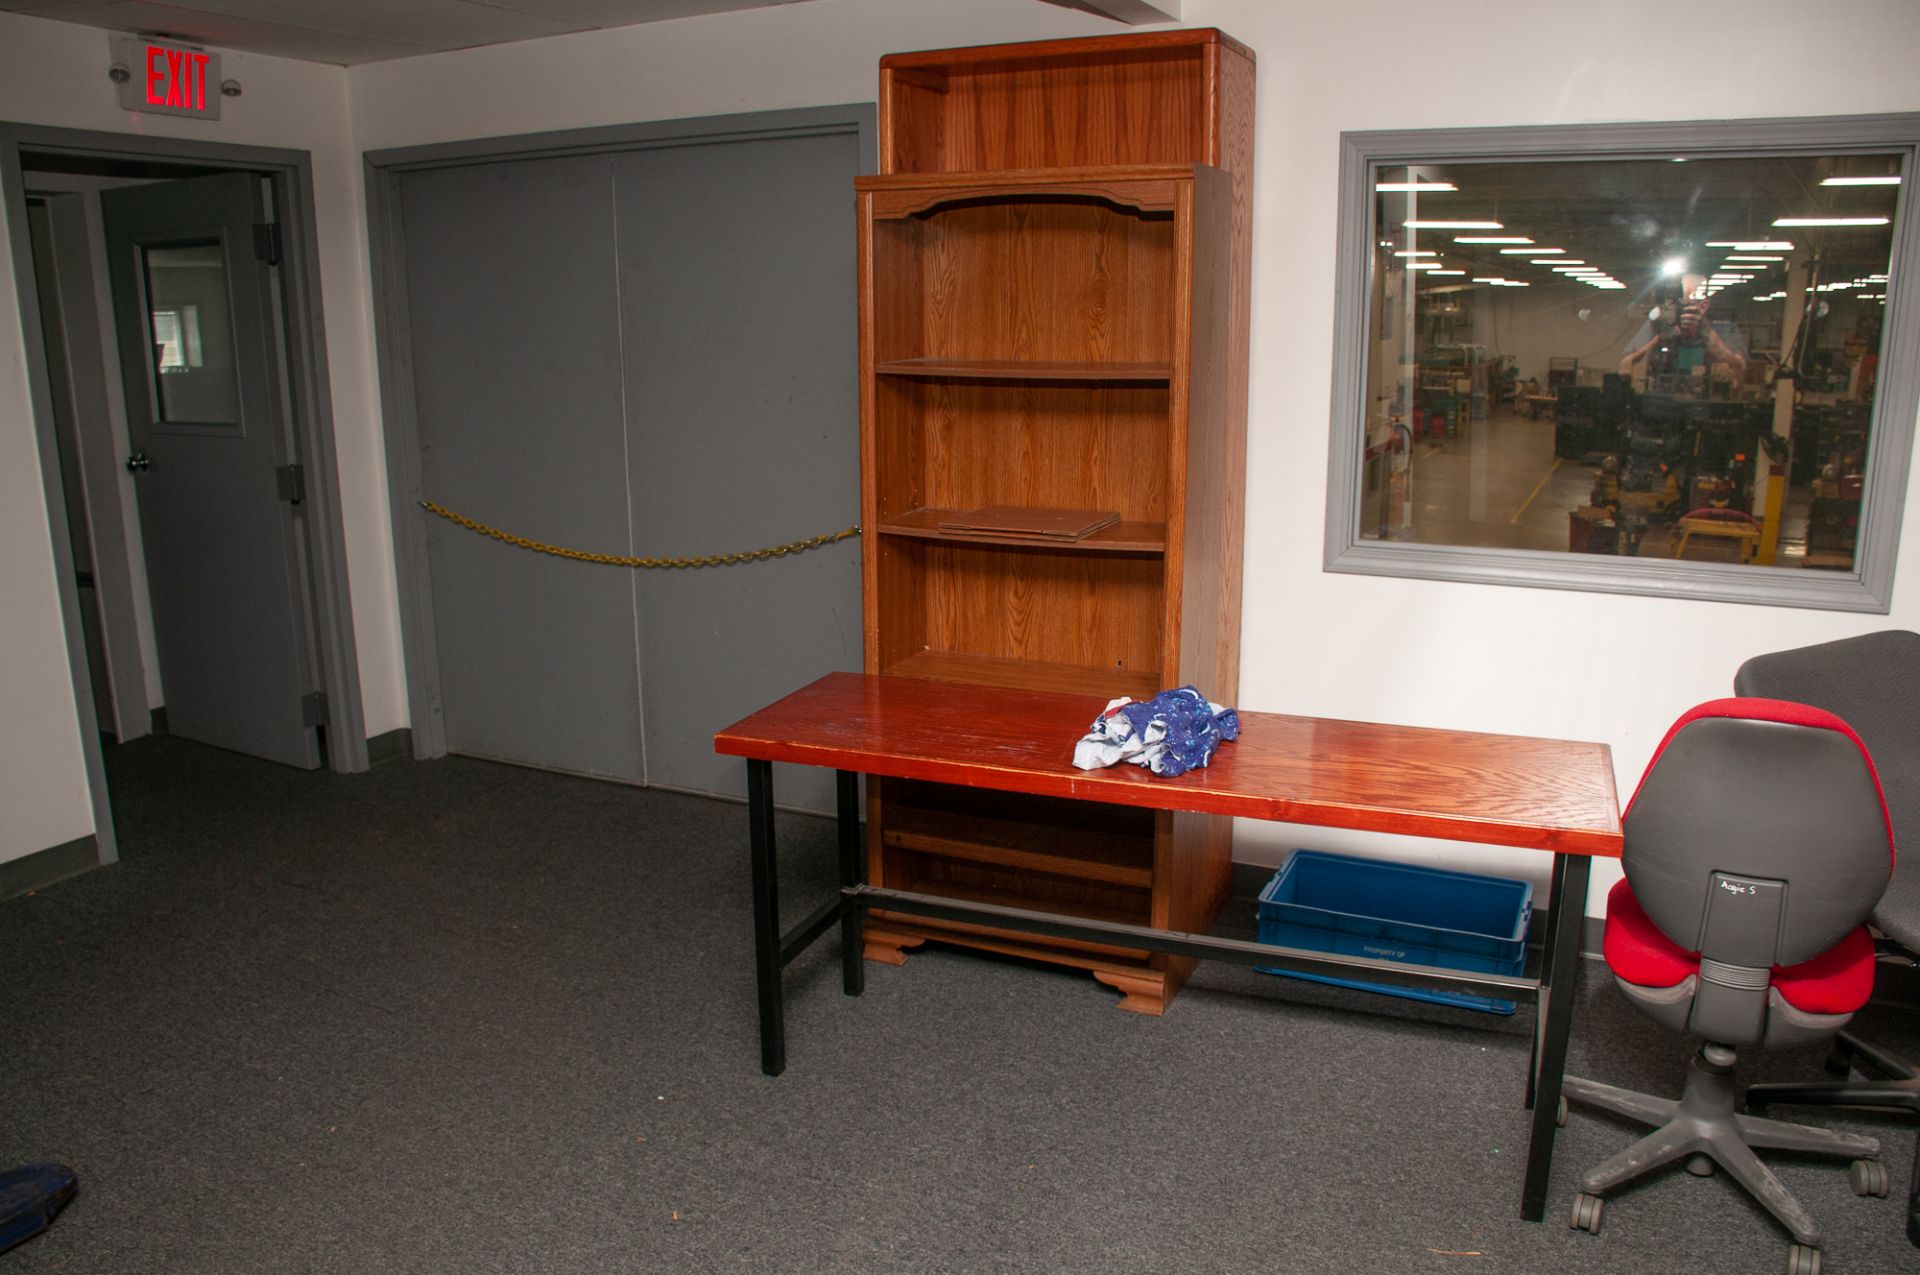 Office Furniture On Second Floor Front of Building, Microwave, Refridgerator, Desks Chairs, Filing C - Image 34 of 37